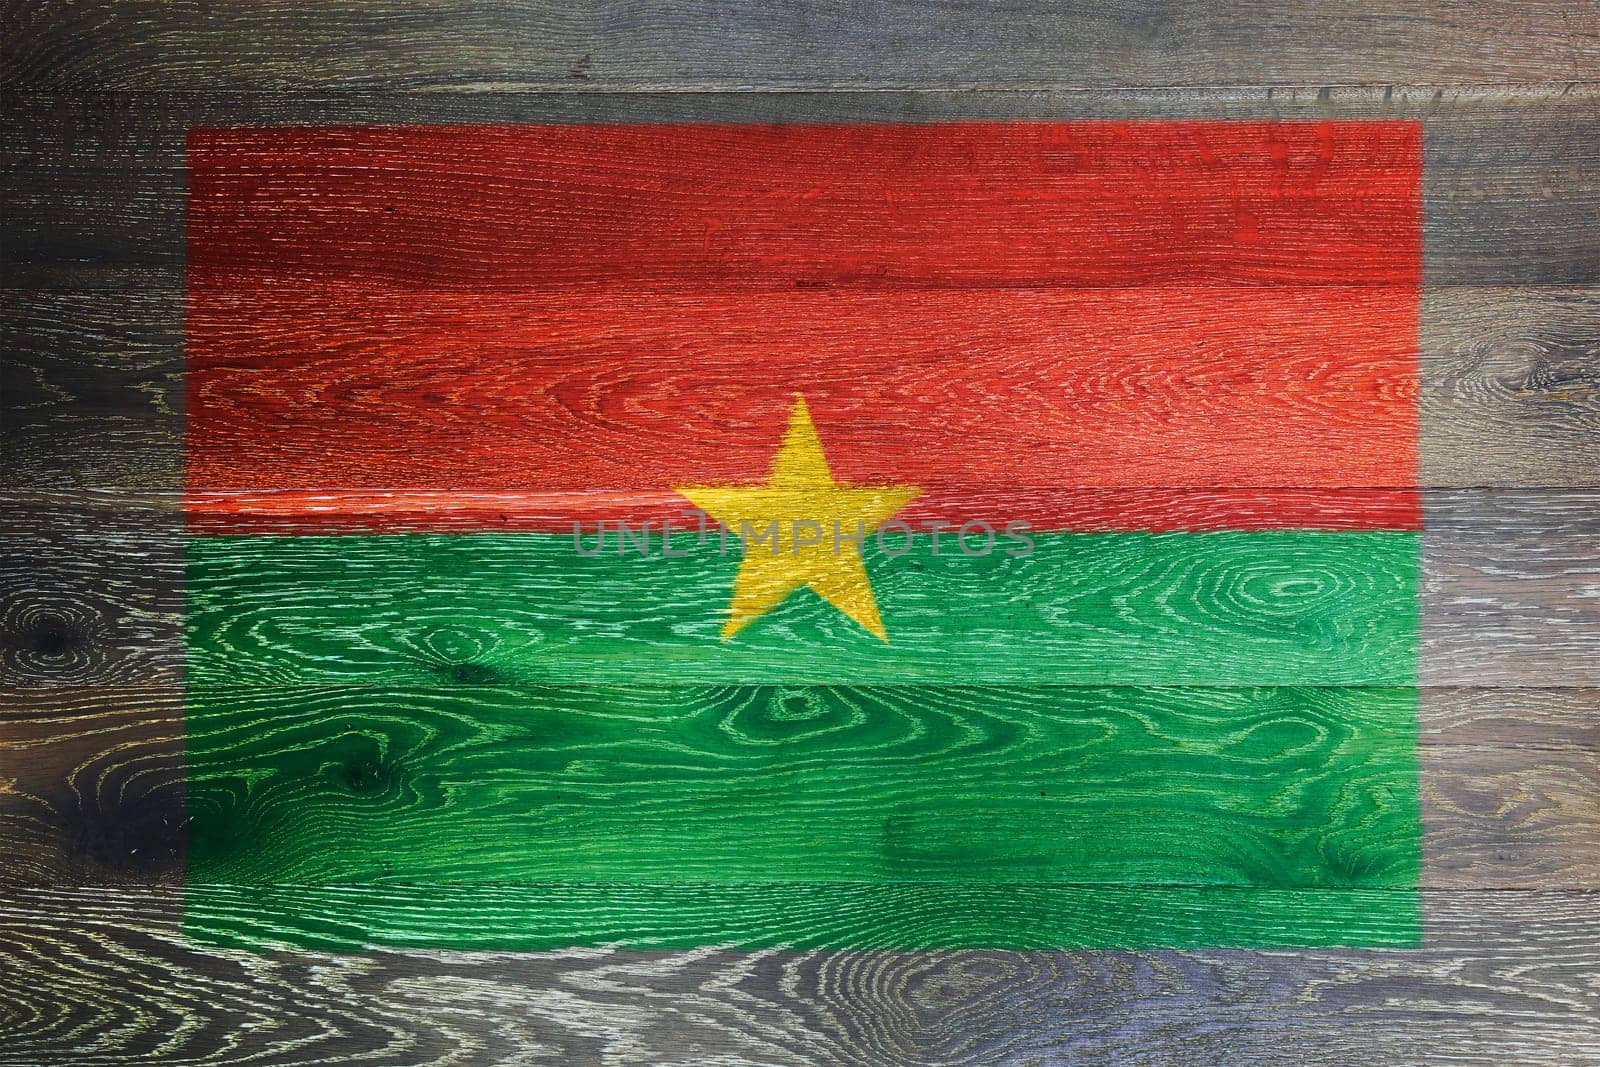 Burkina flag on rustic old wood surface background by VivacityImages